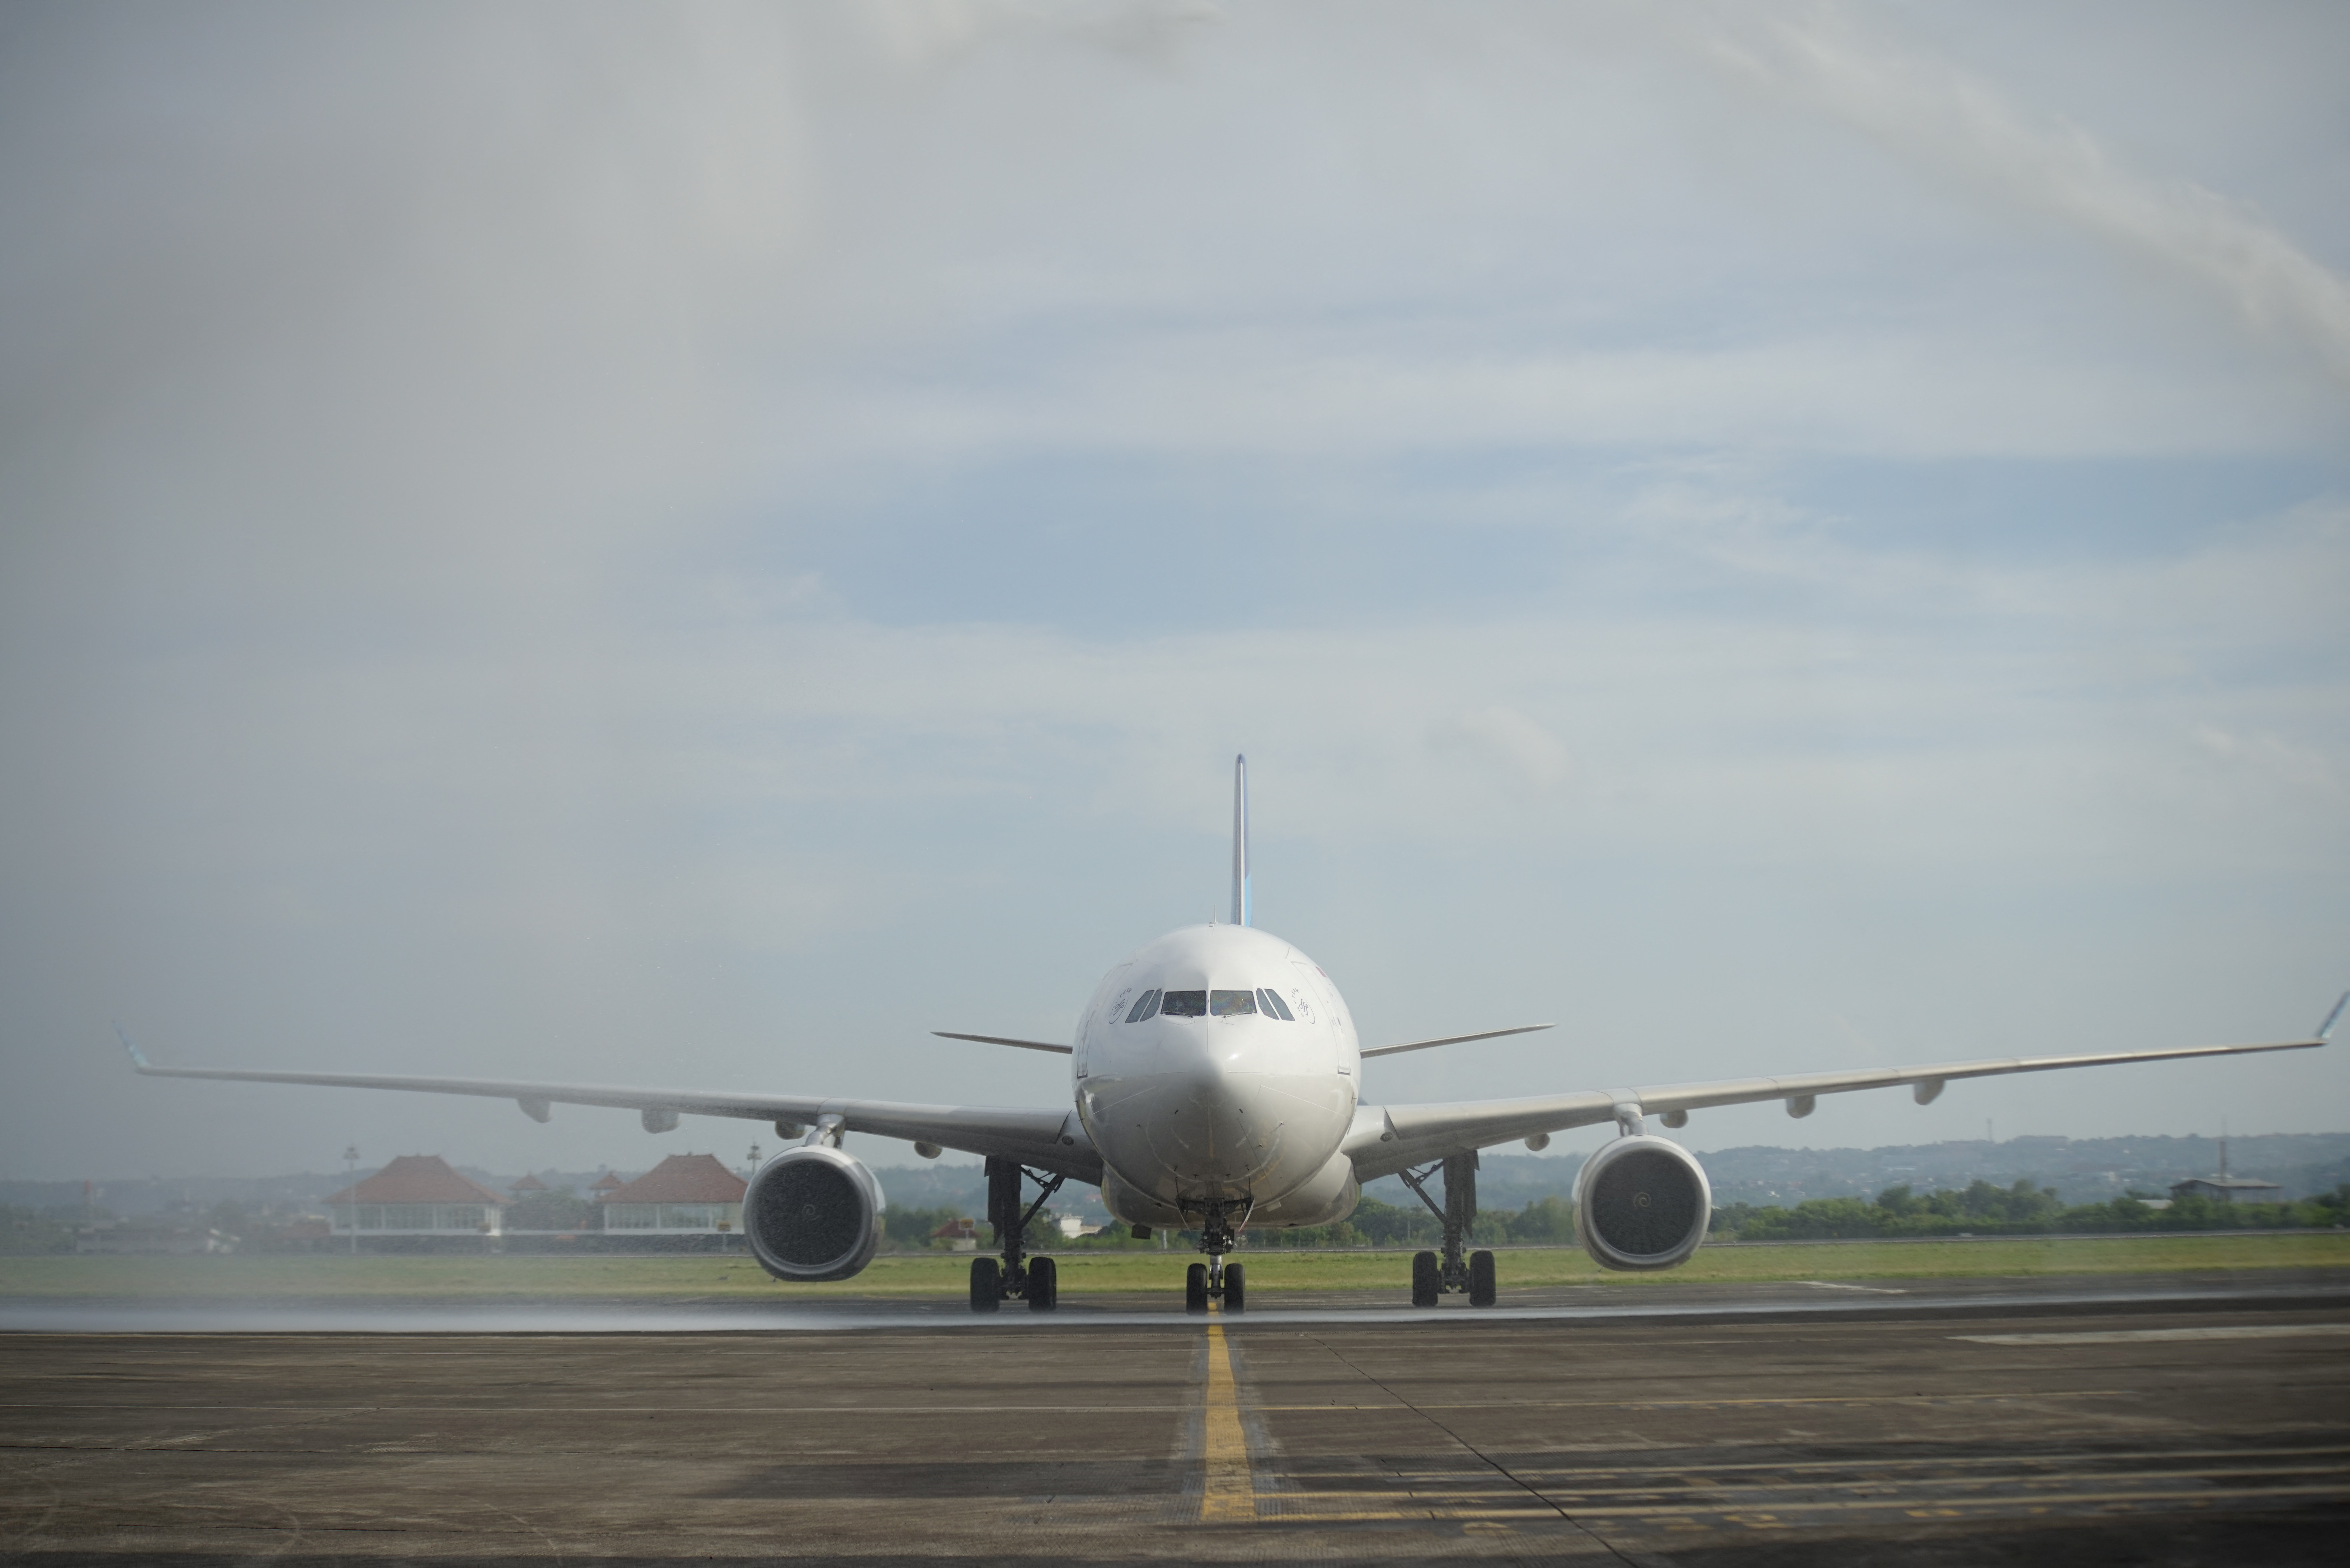 Bali welcomes its first international tourist flight amid cautious reopening